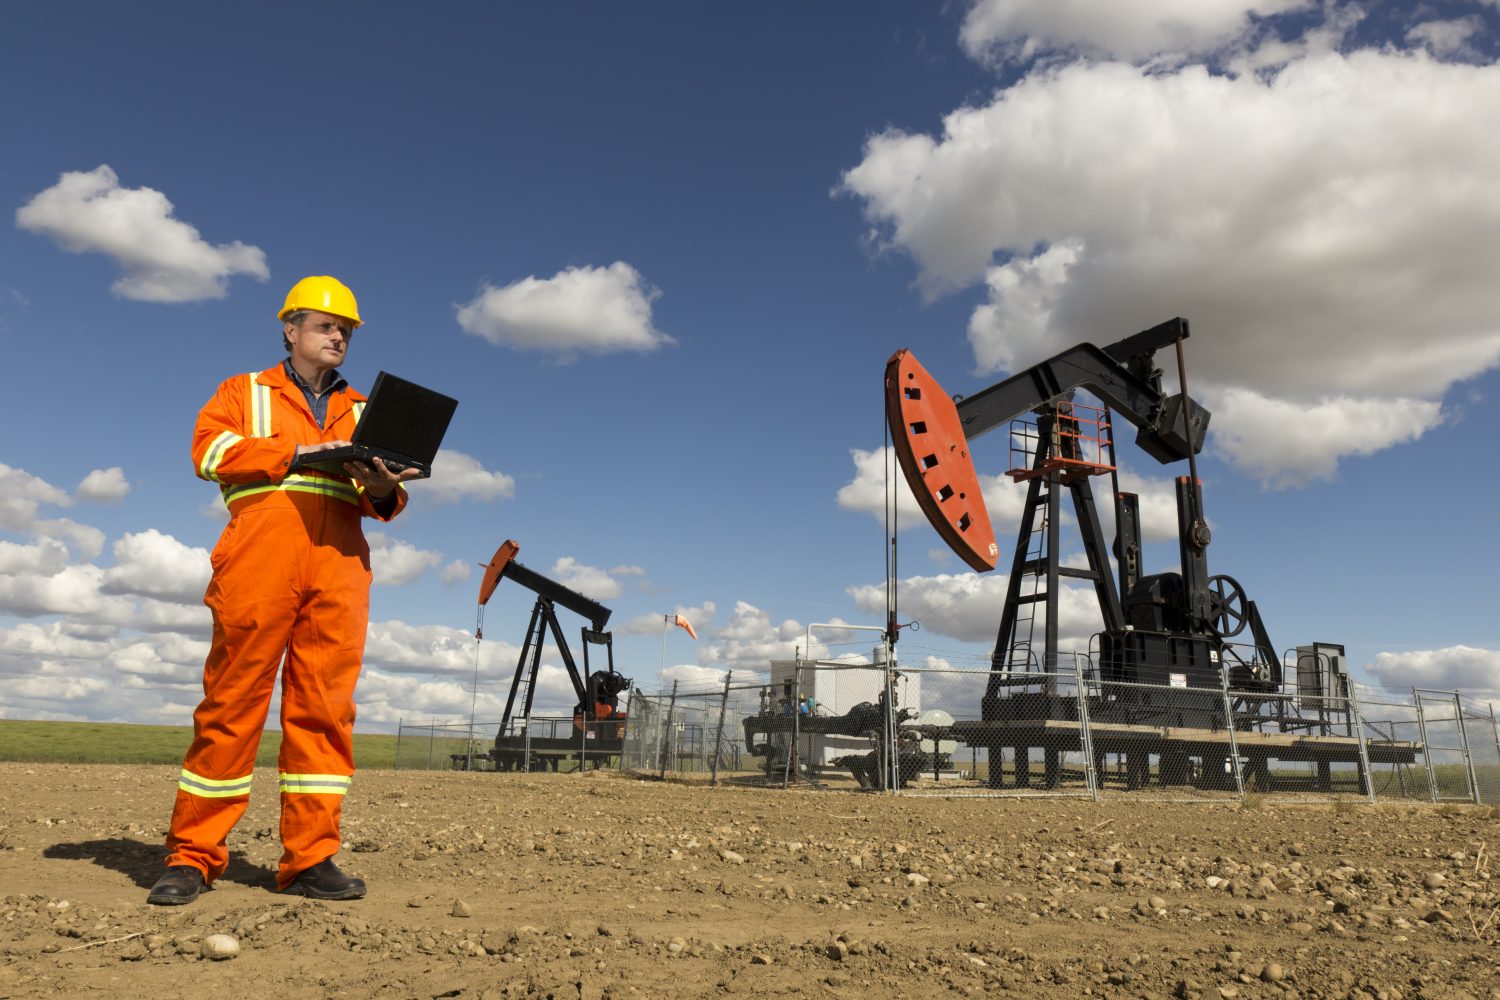 An image from the oil industry of an engineer and computer working at a pair of pumpjacks.